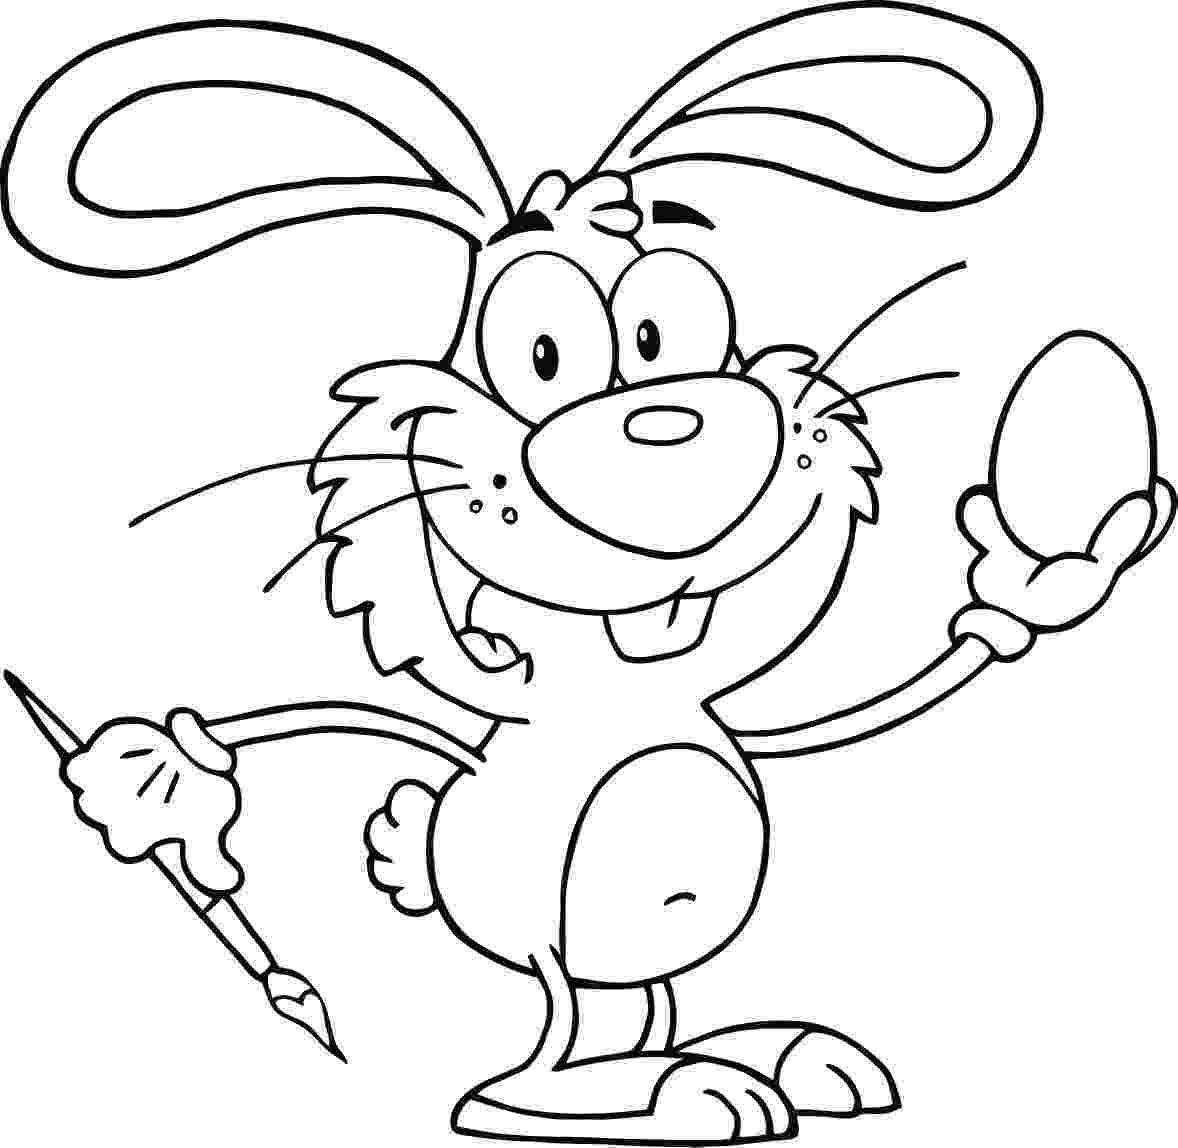 rabbit pictures to colour bunny coloring pages best coloring pages for kids colour to pictures rabbit 